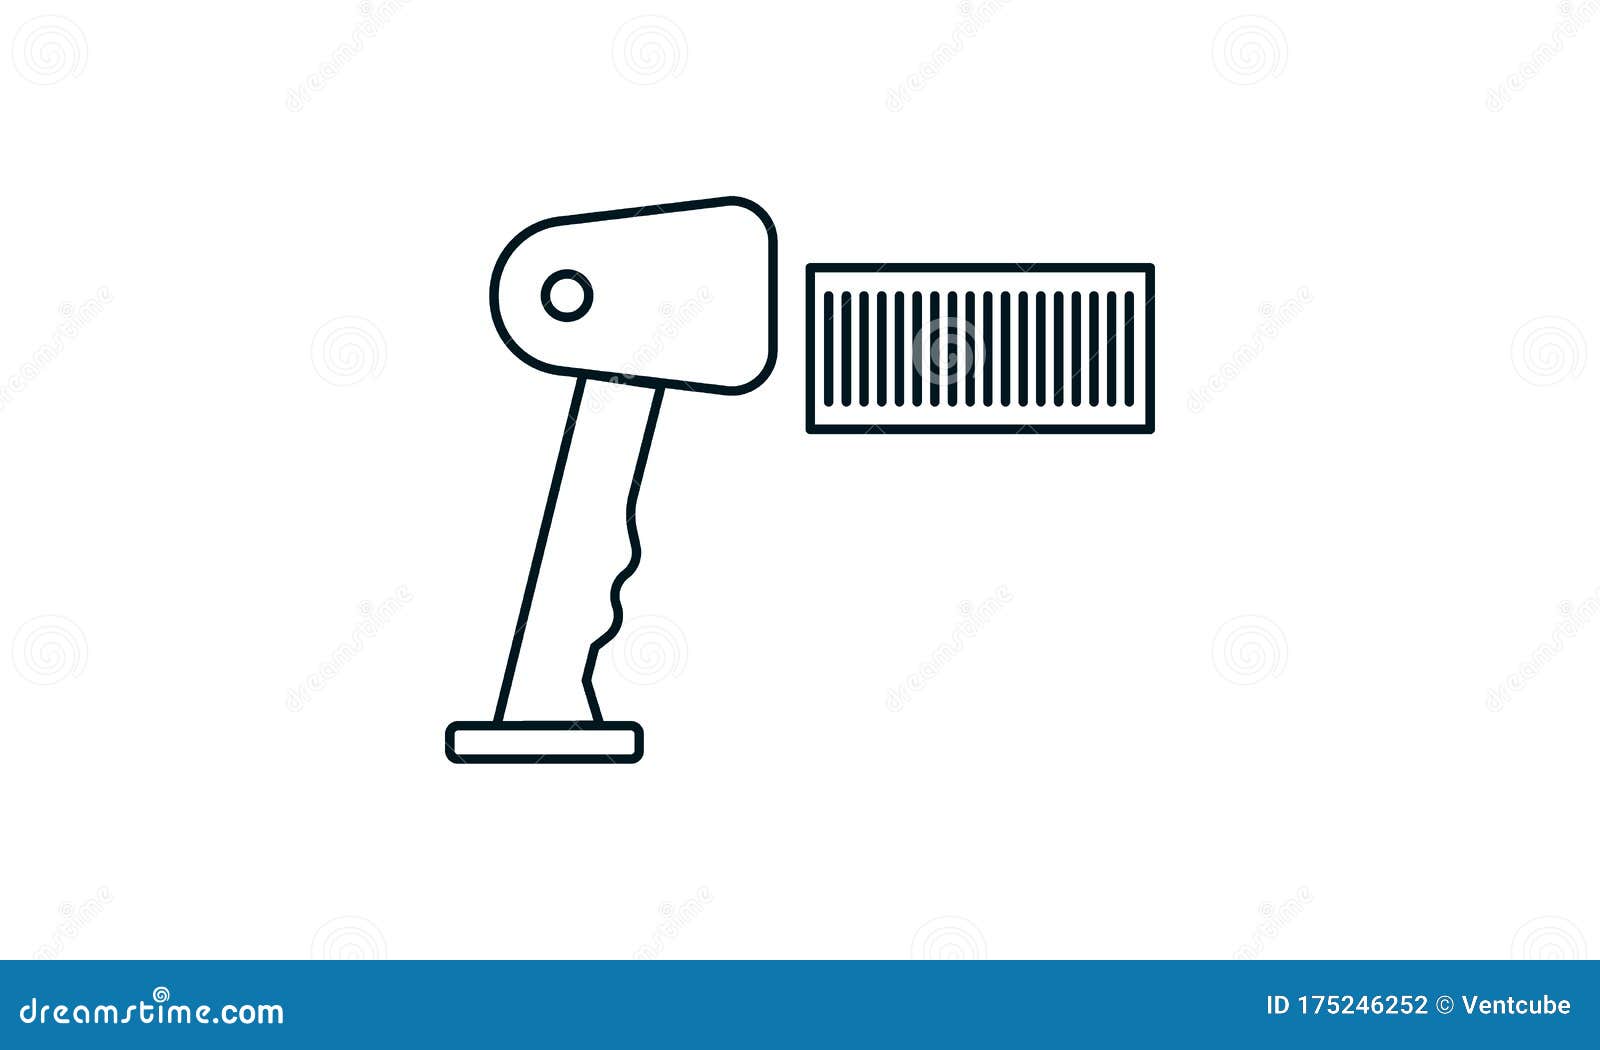 Cartoon Of Barcode Scan Illustrations, Royalty-Free Vector 